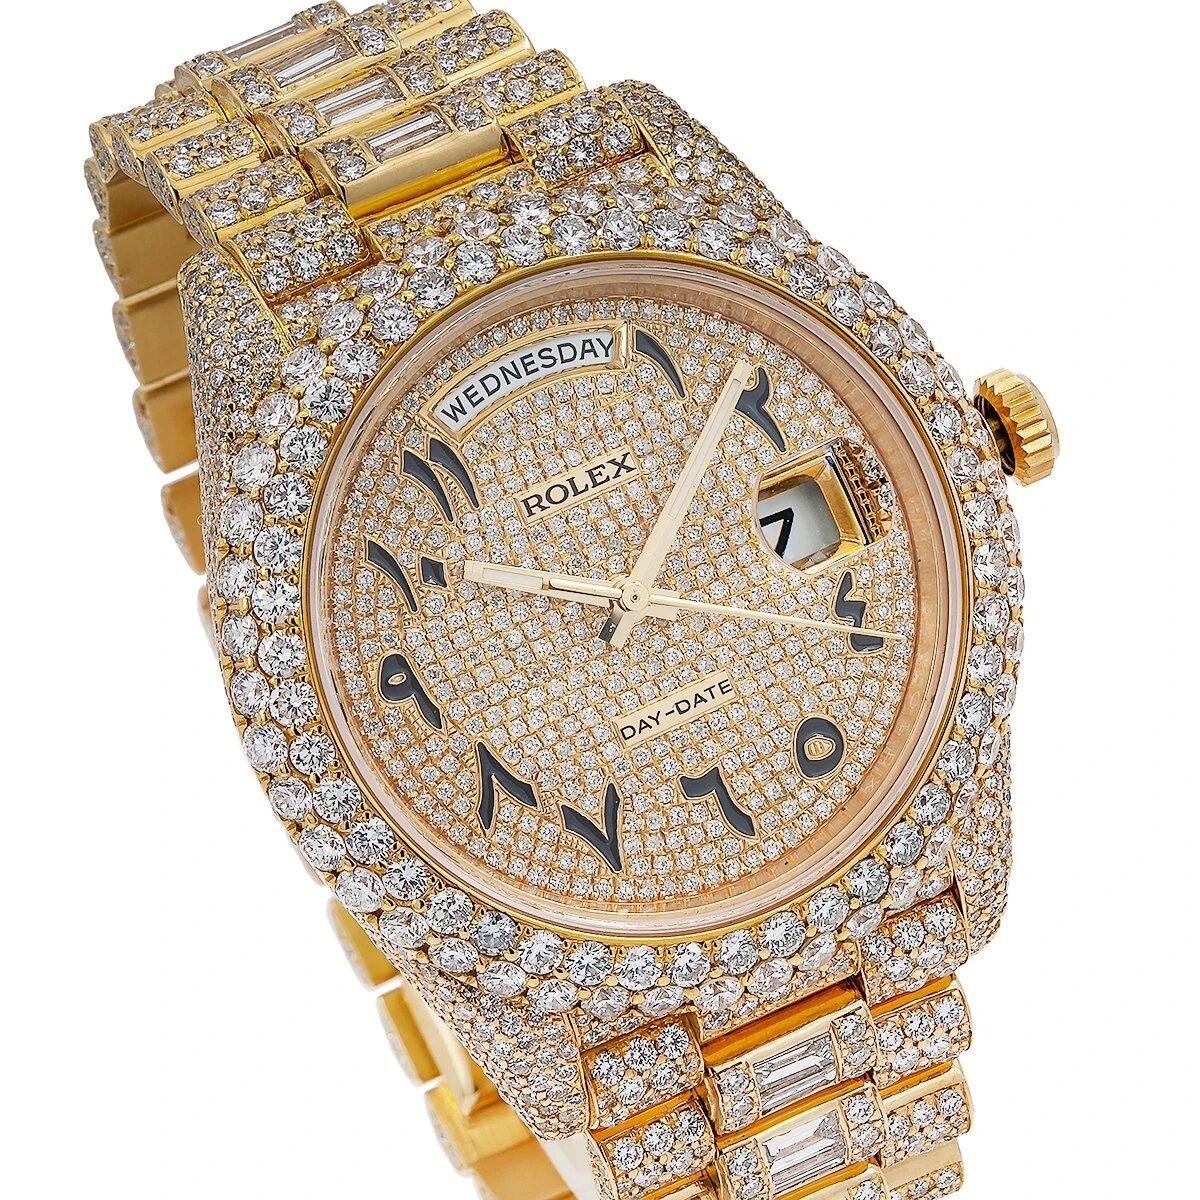 18k Gold Rolex Day Date Arabic Dial Special Edition Diamond Watch | The Diamond